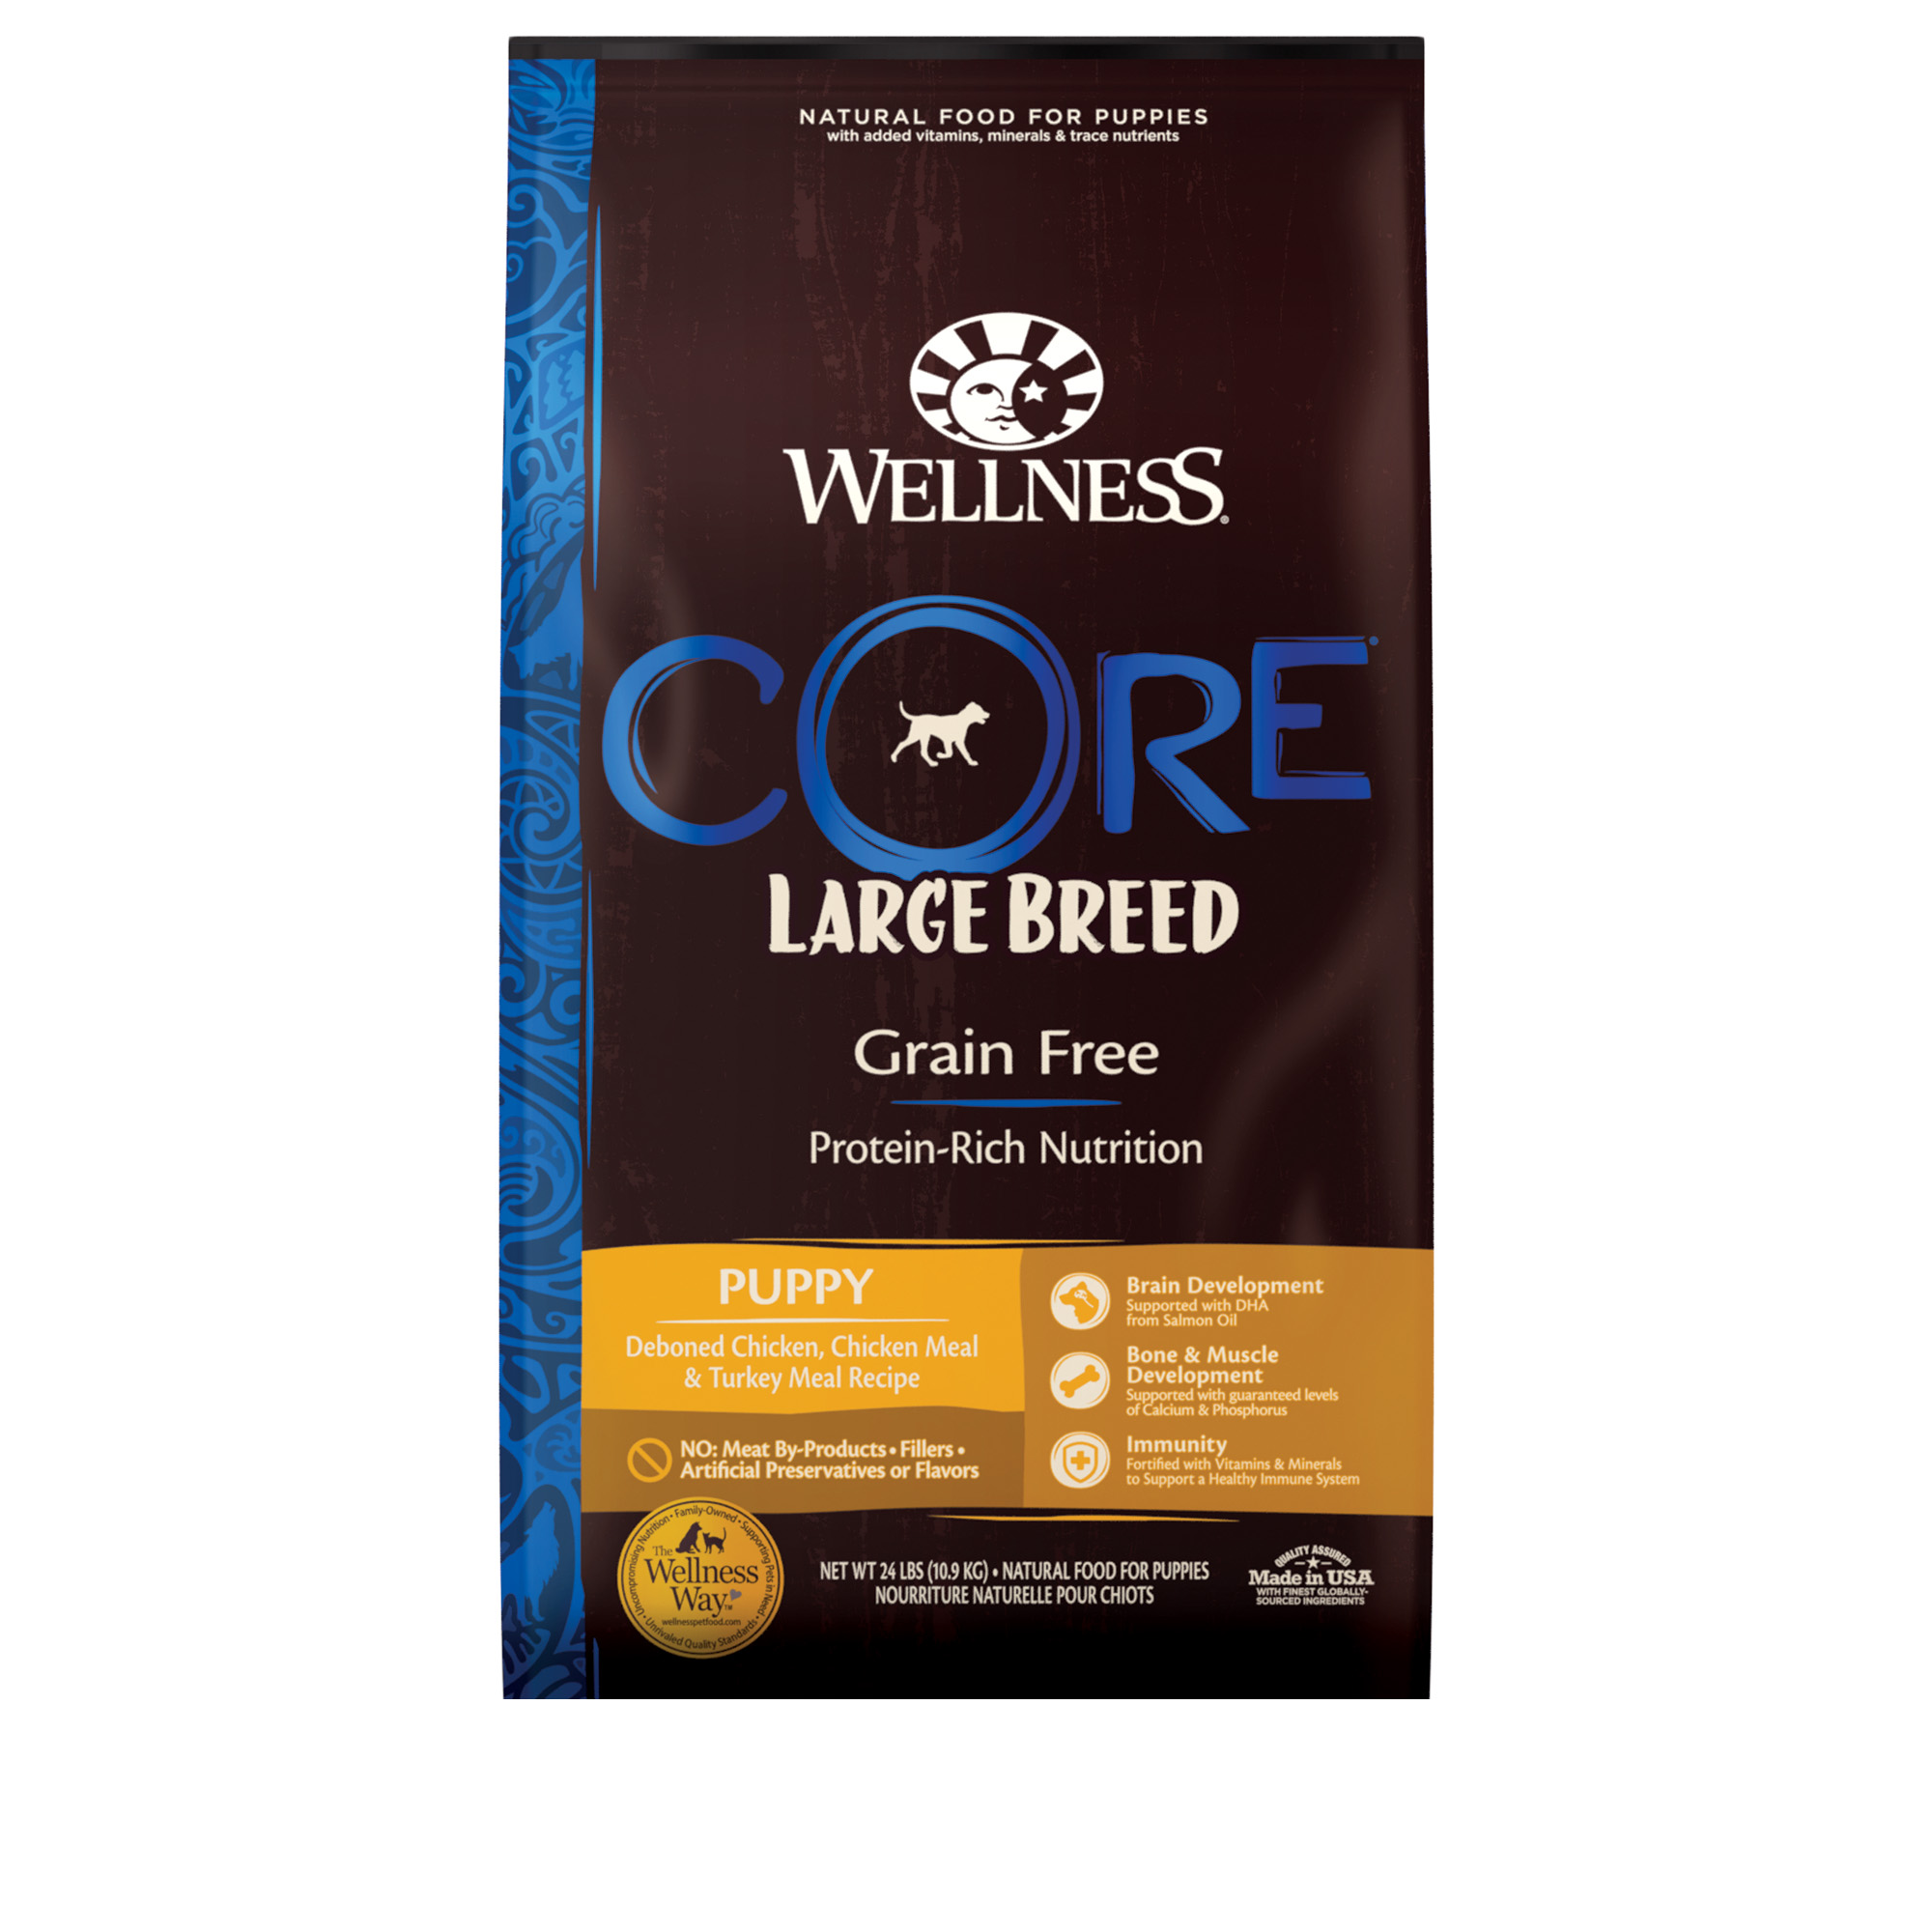 Wellness CORE Natural Grain Free Dry Puppy Food, Large Breed Puppy, 24-Pound Bag - image 1 of 8